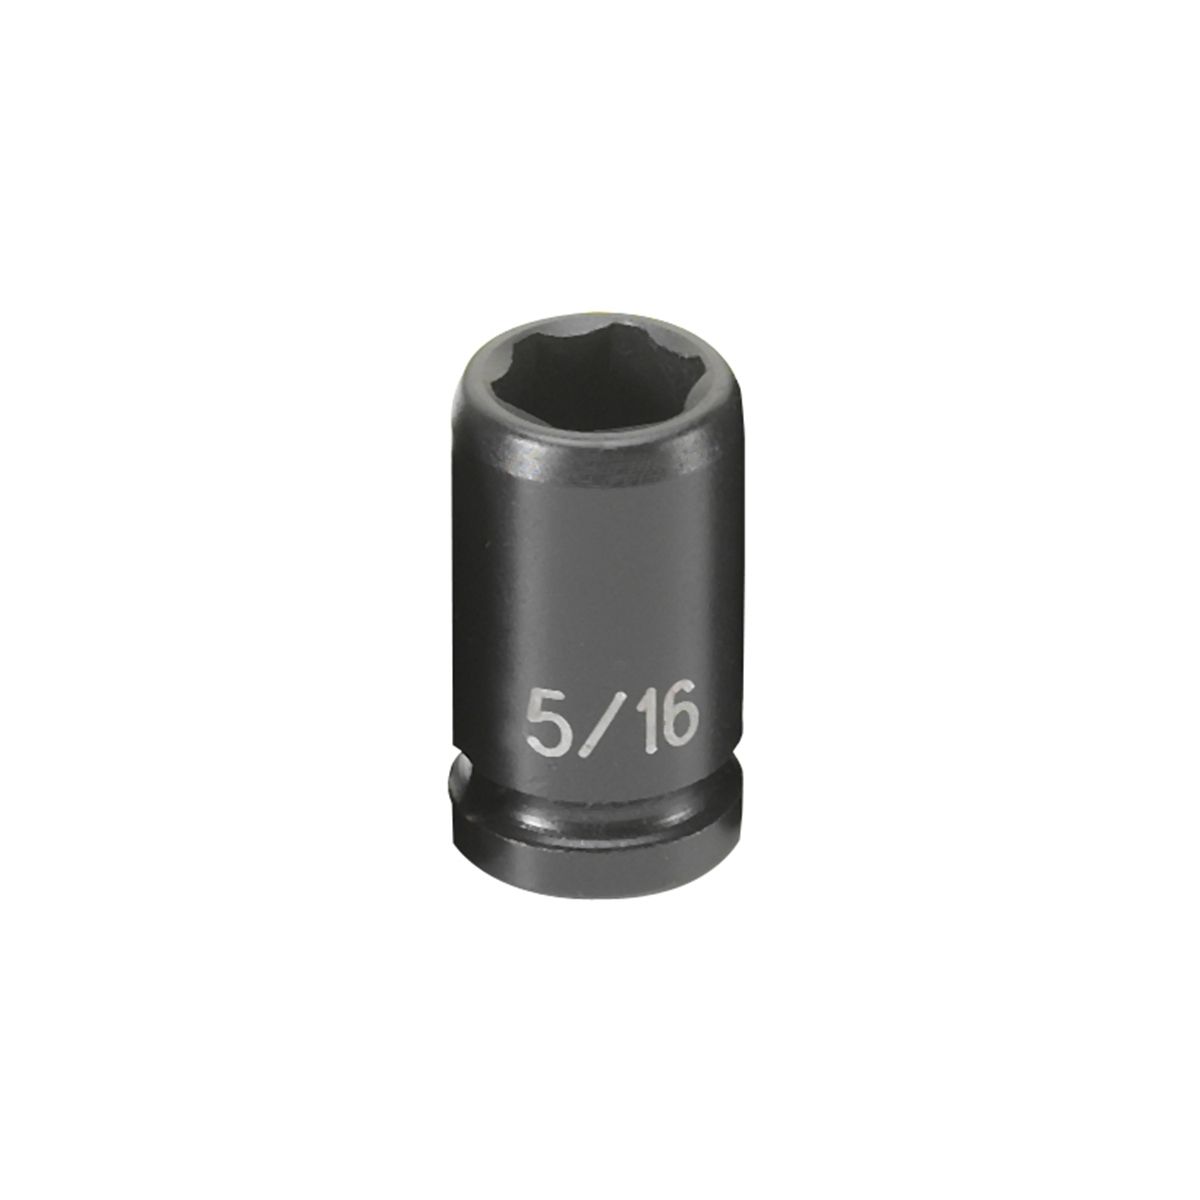 1/4" Surface Drive x 5/16" Magnetic Impact Socket